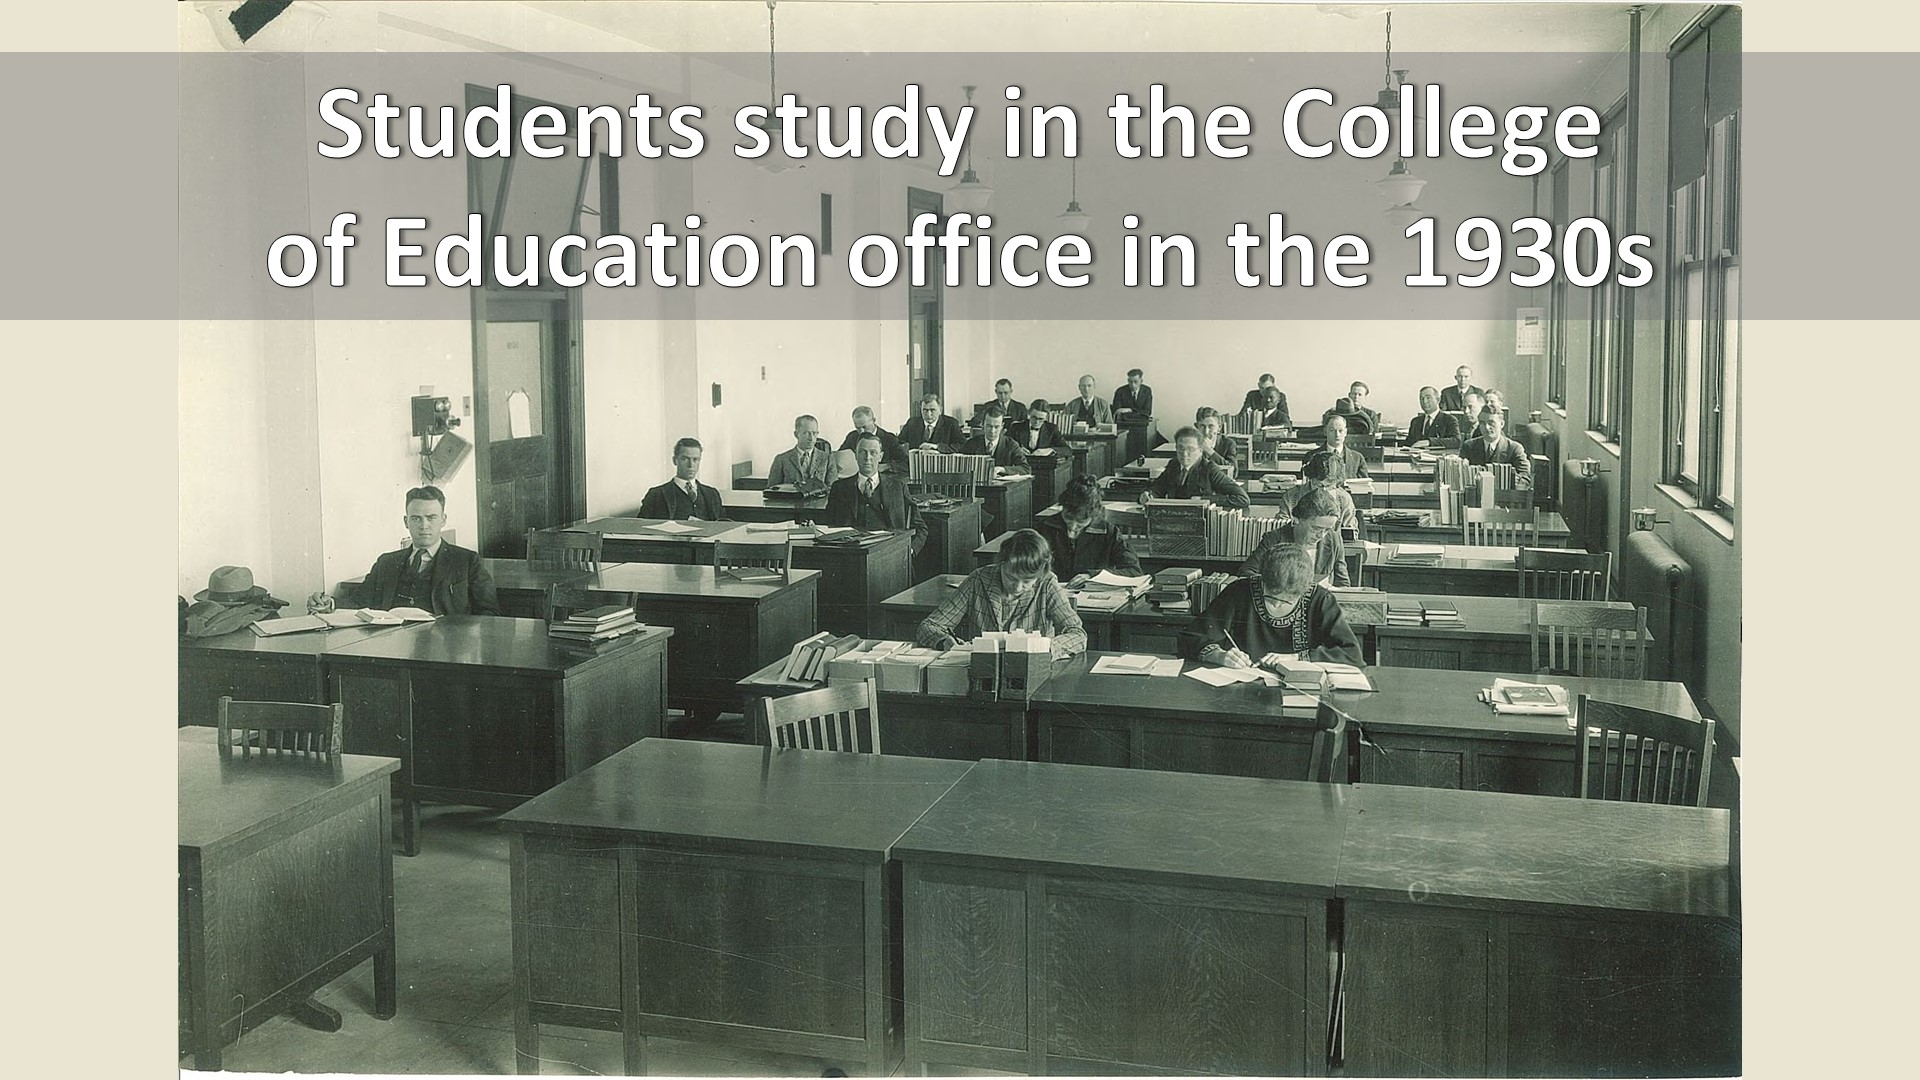 Students study in the College of Education office in the 1930s